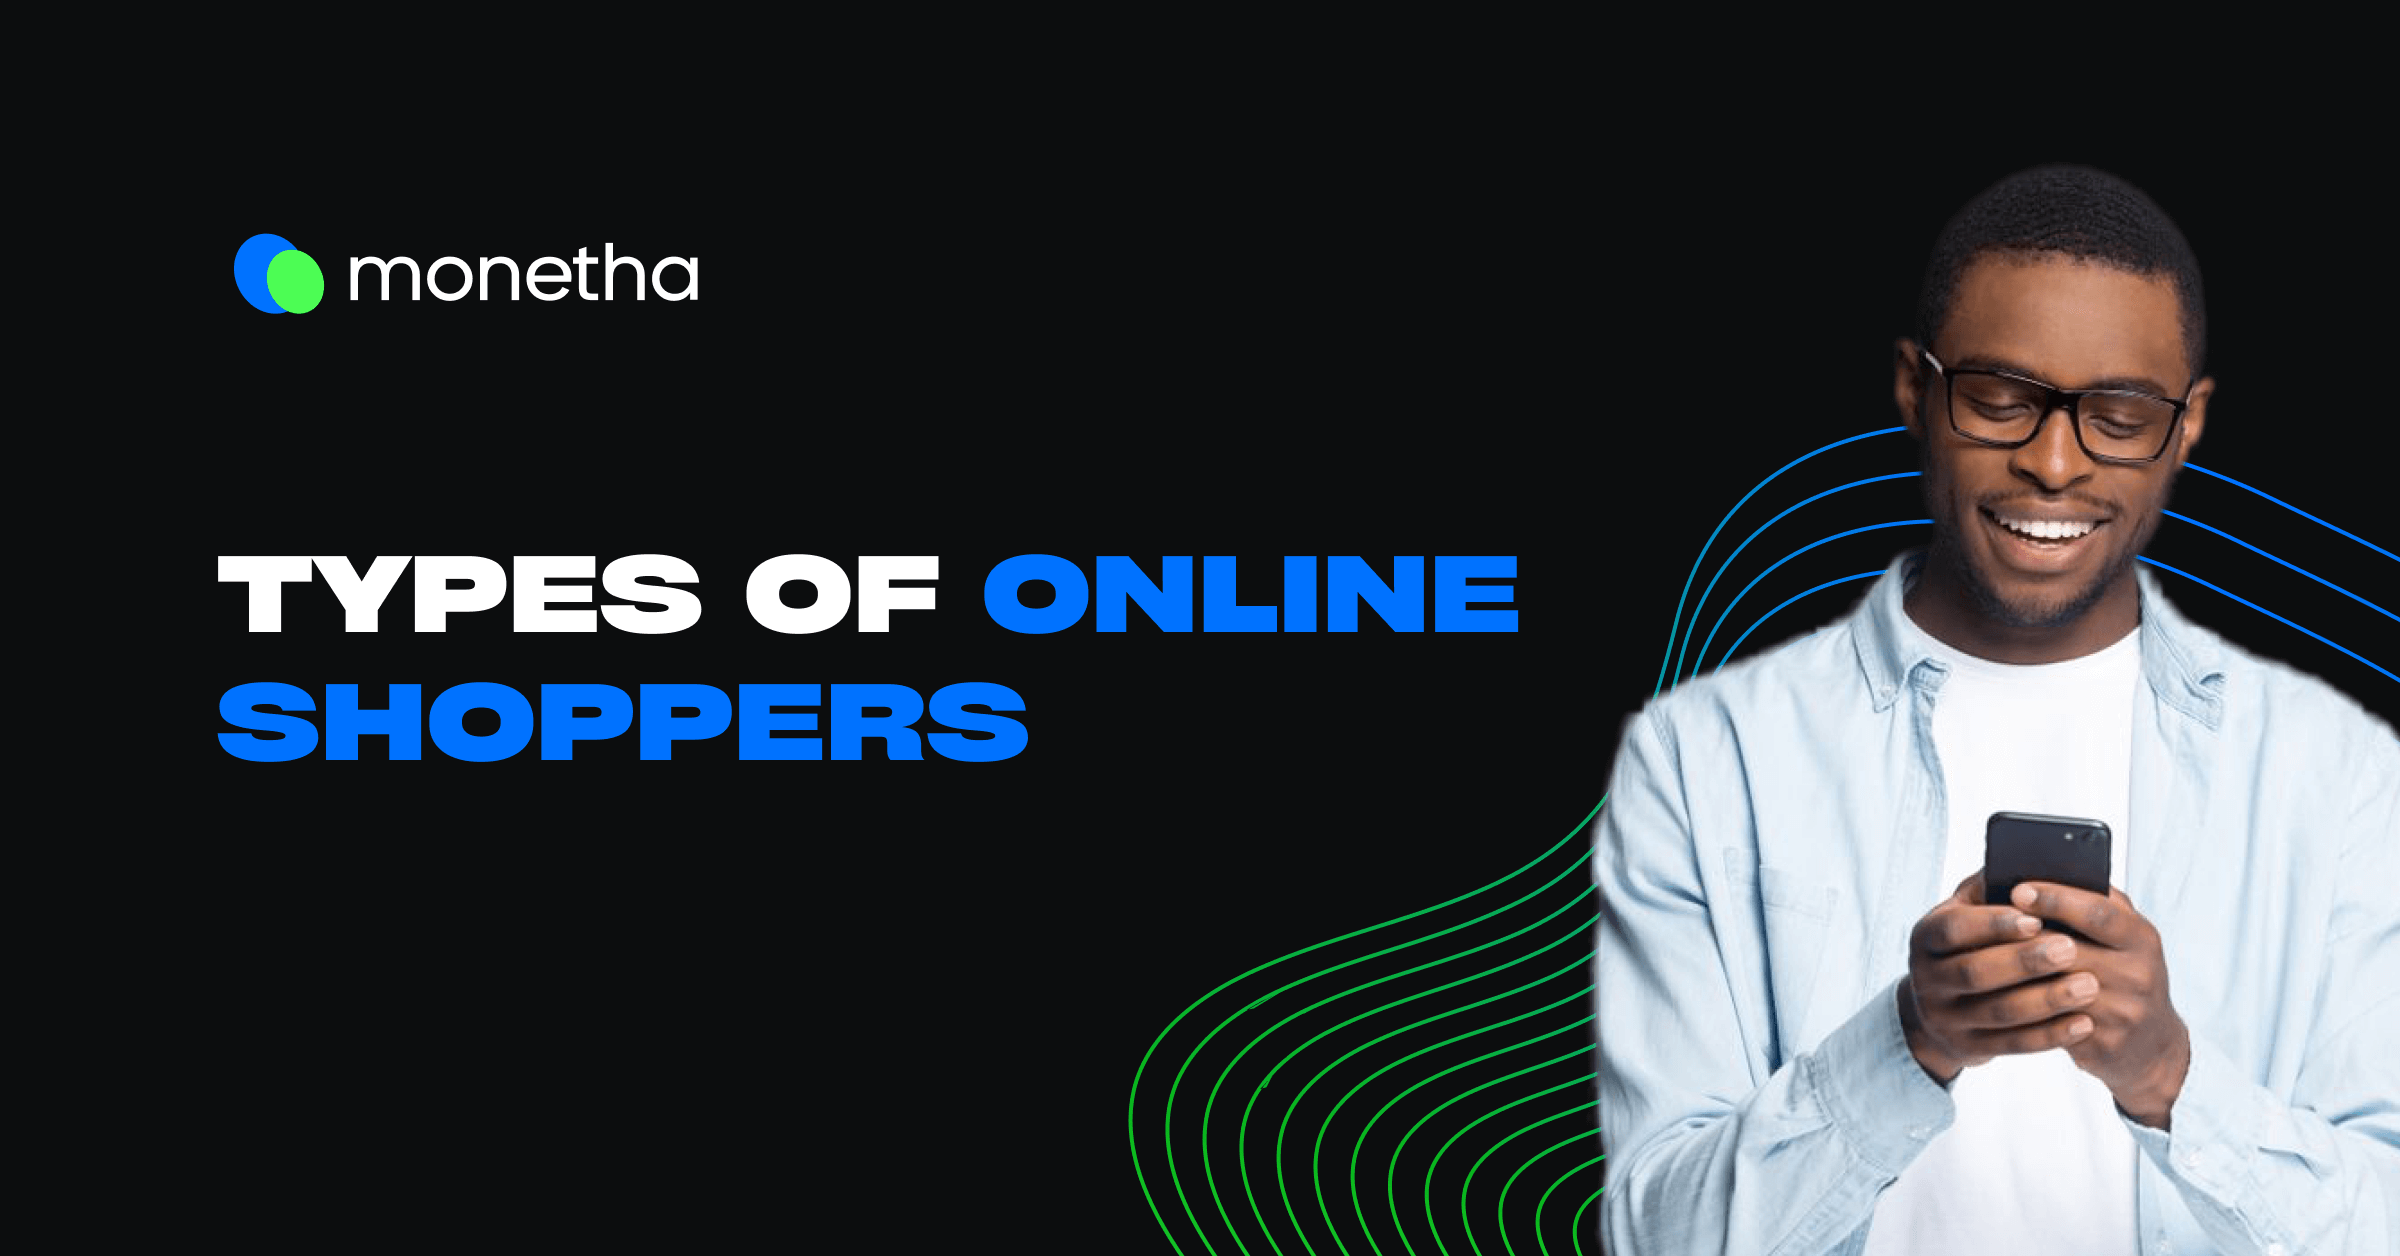 types of online shoppers image 1